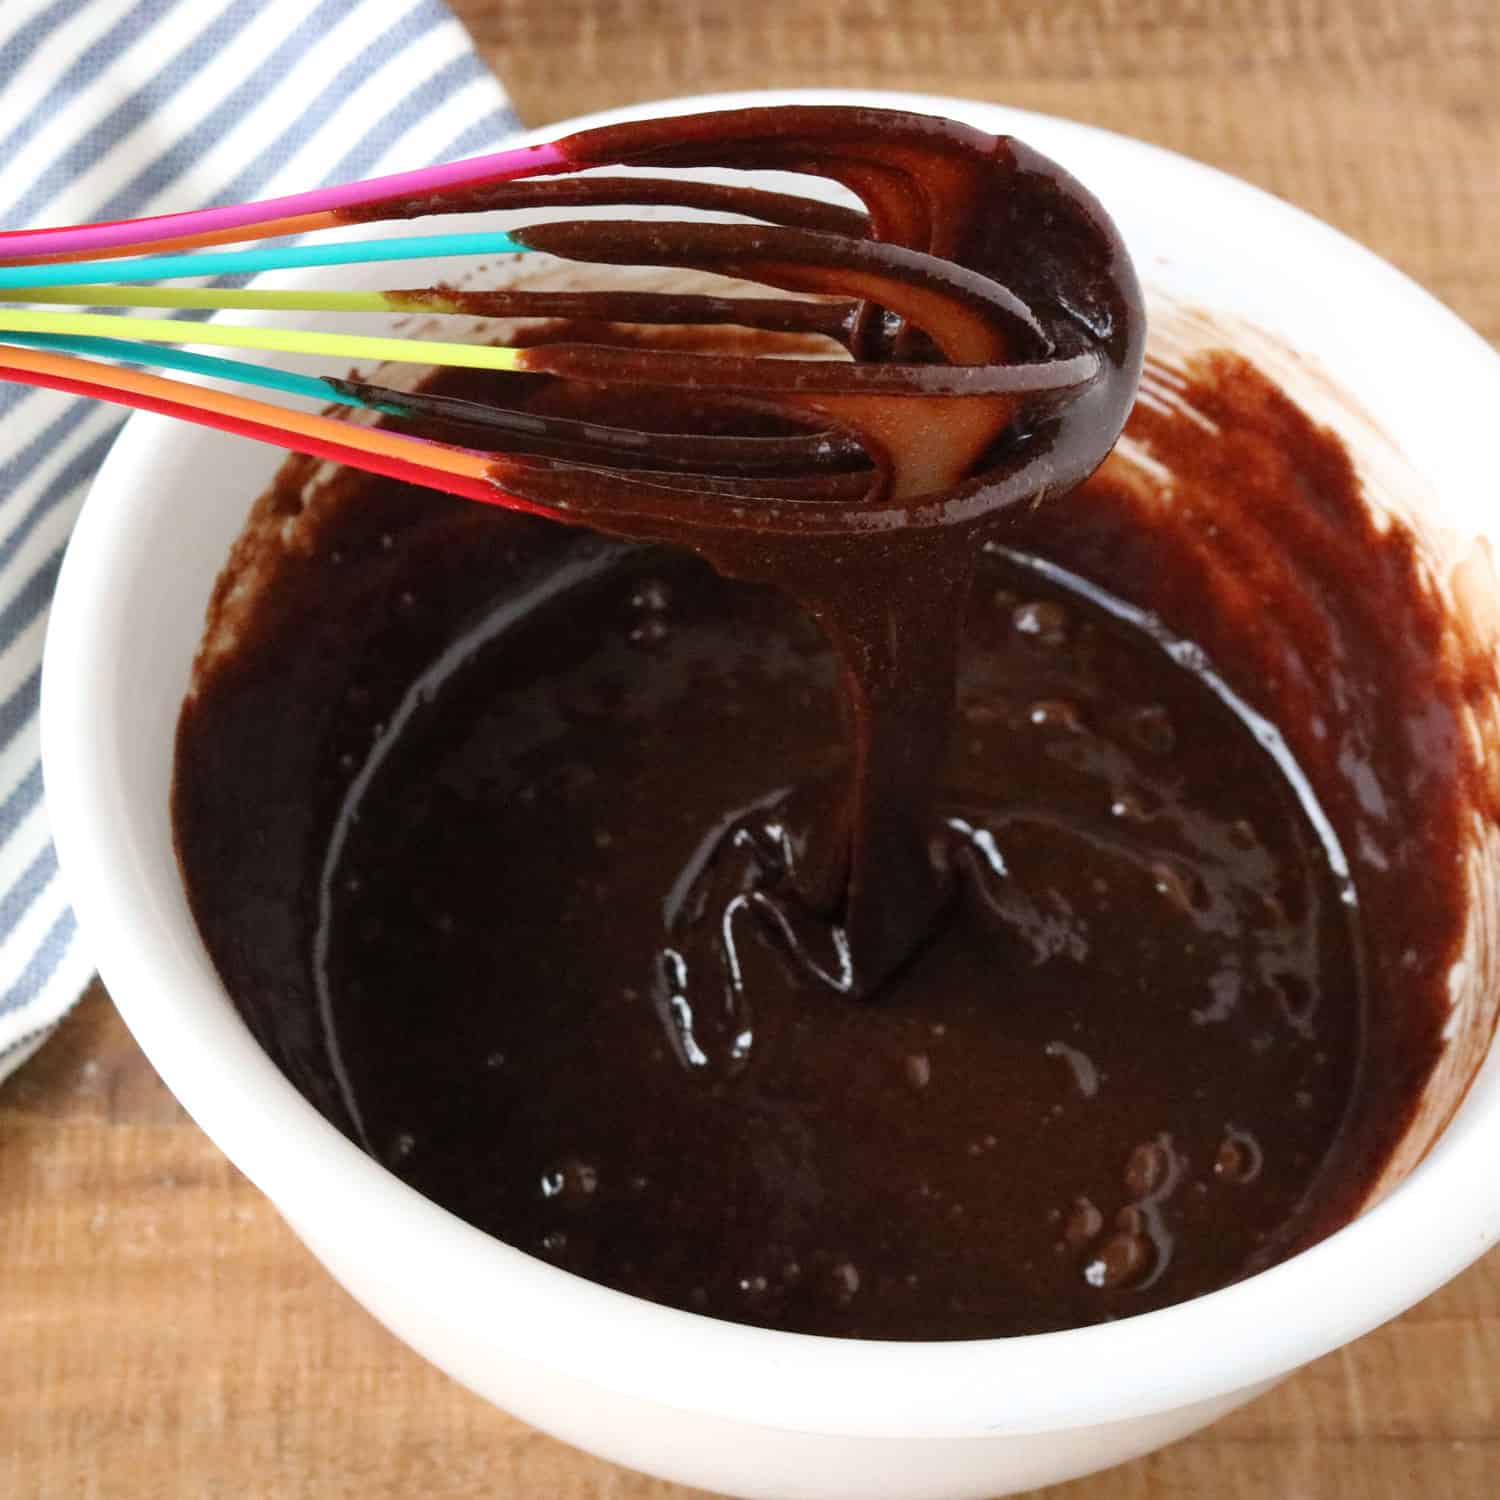 chocolate gluten free cake mixture dripping from a rainbow-colored whisk into a bowl of melted chocolate below